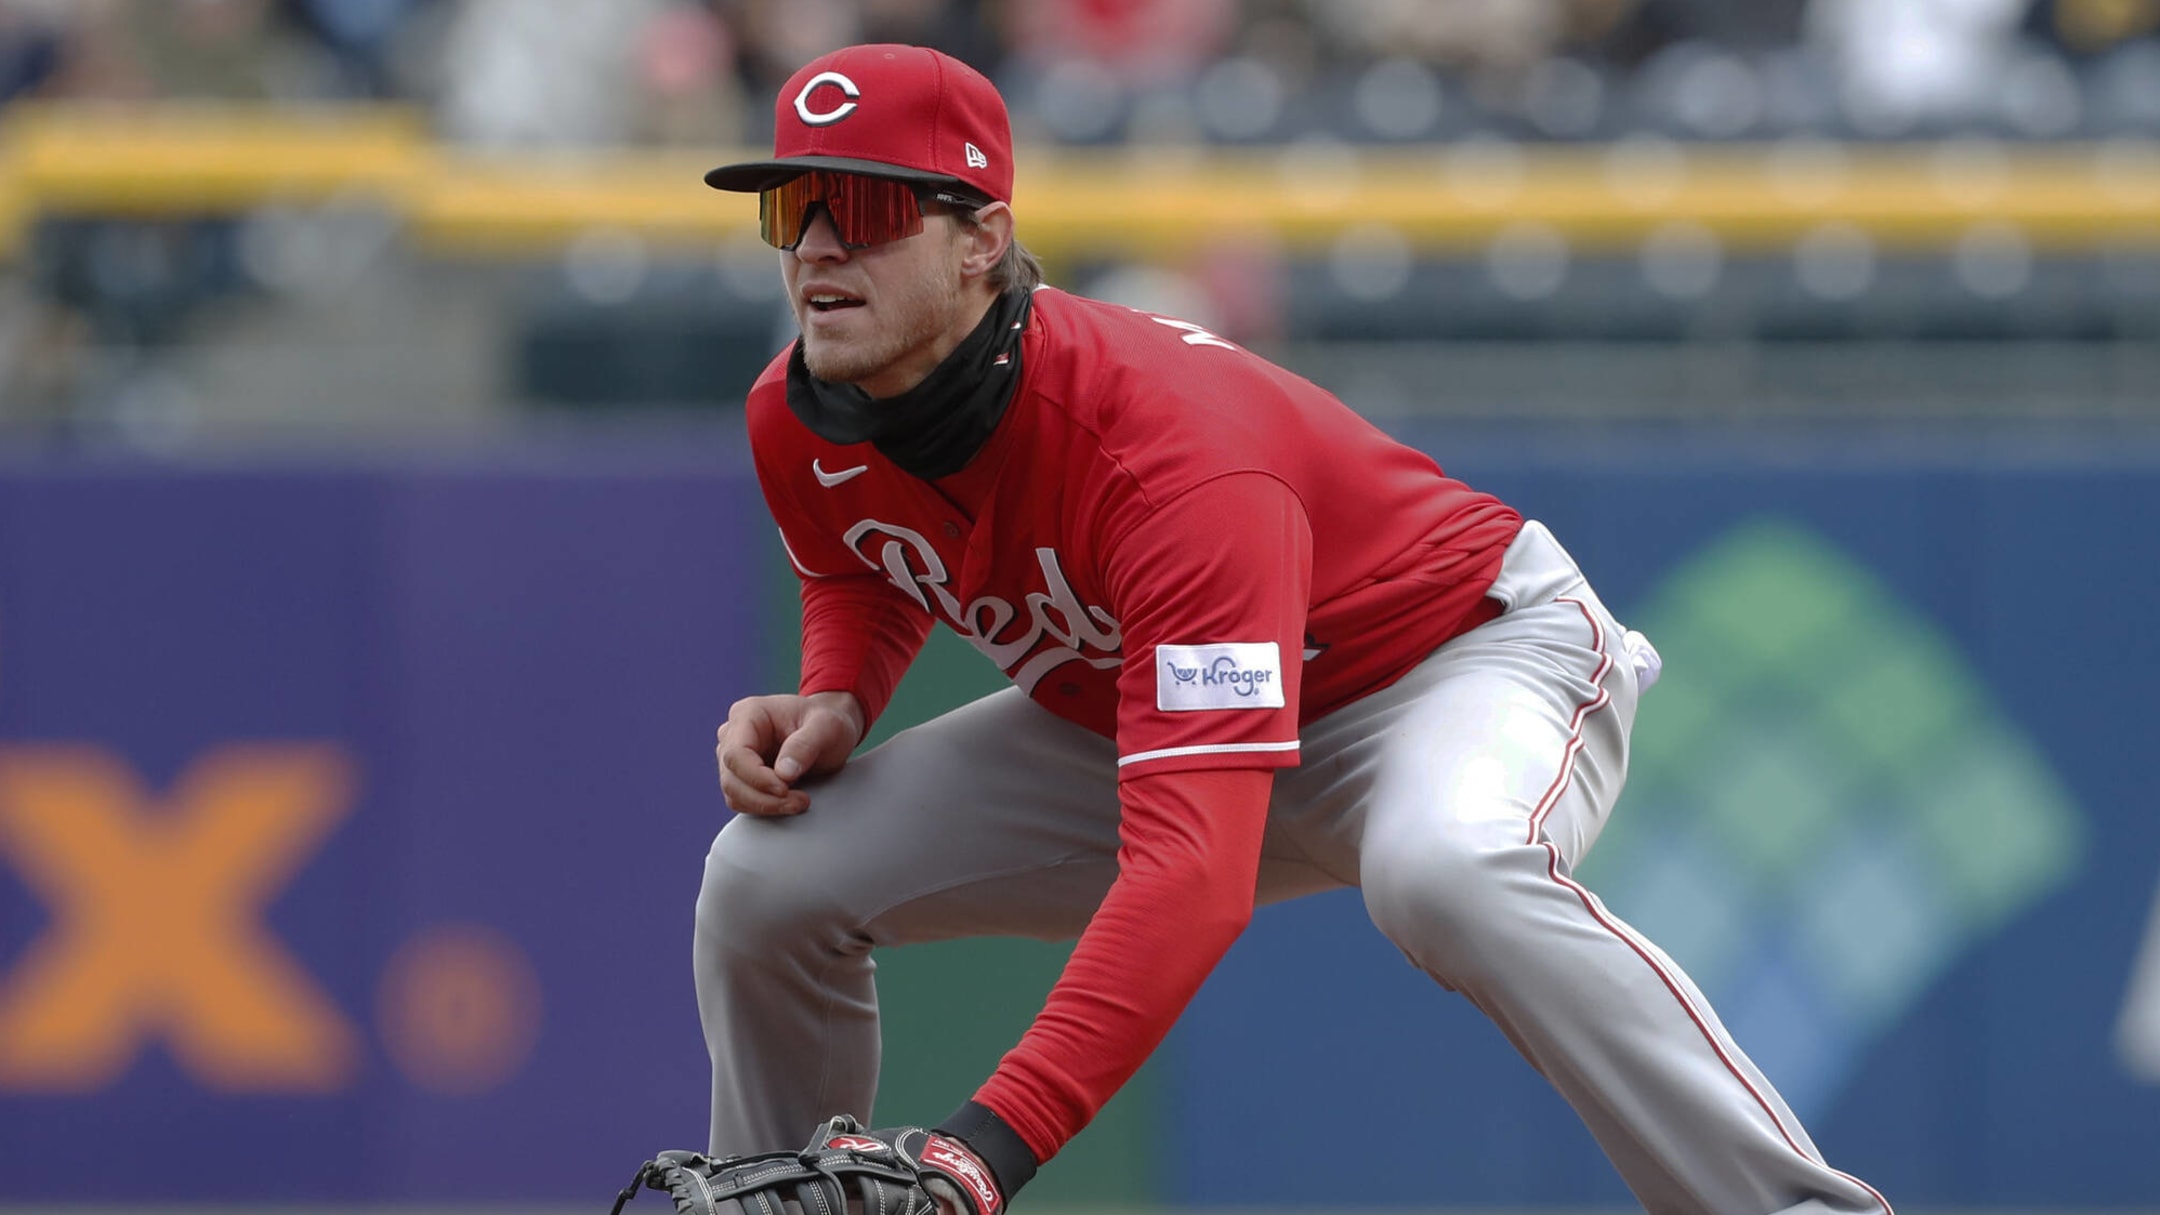 Reds sign free agent outfielder Myers